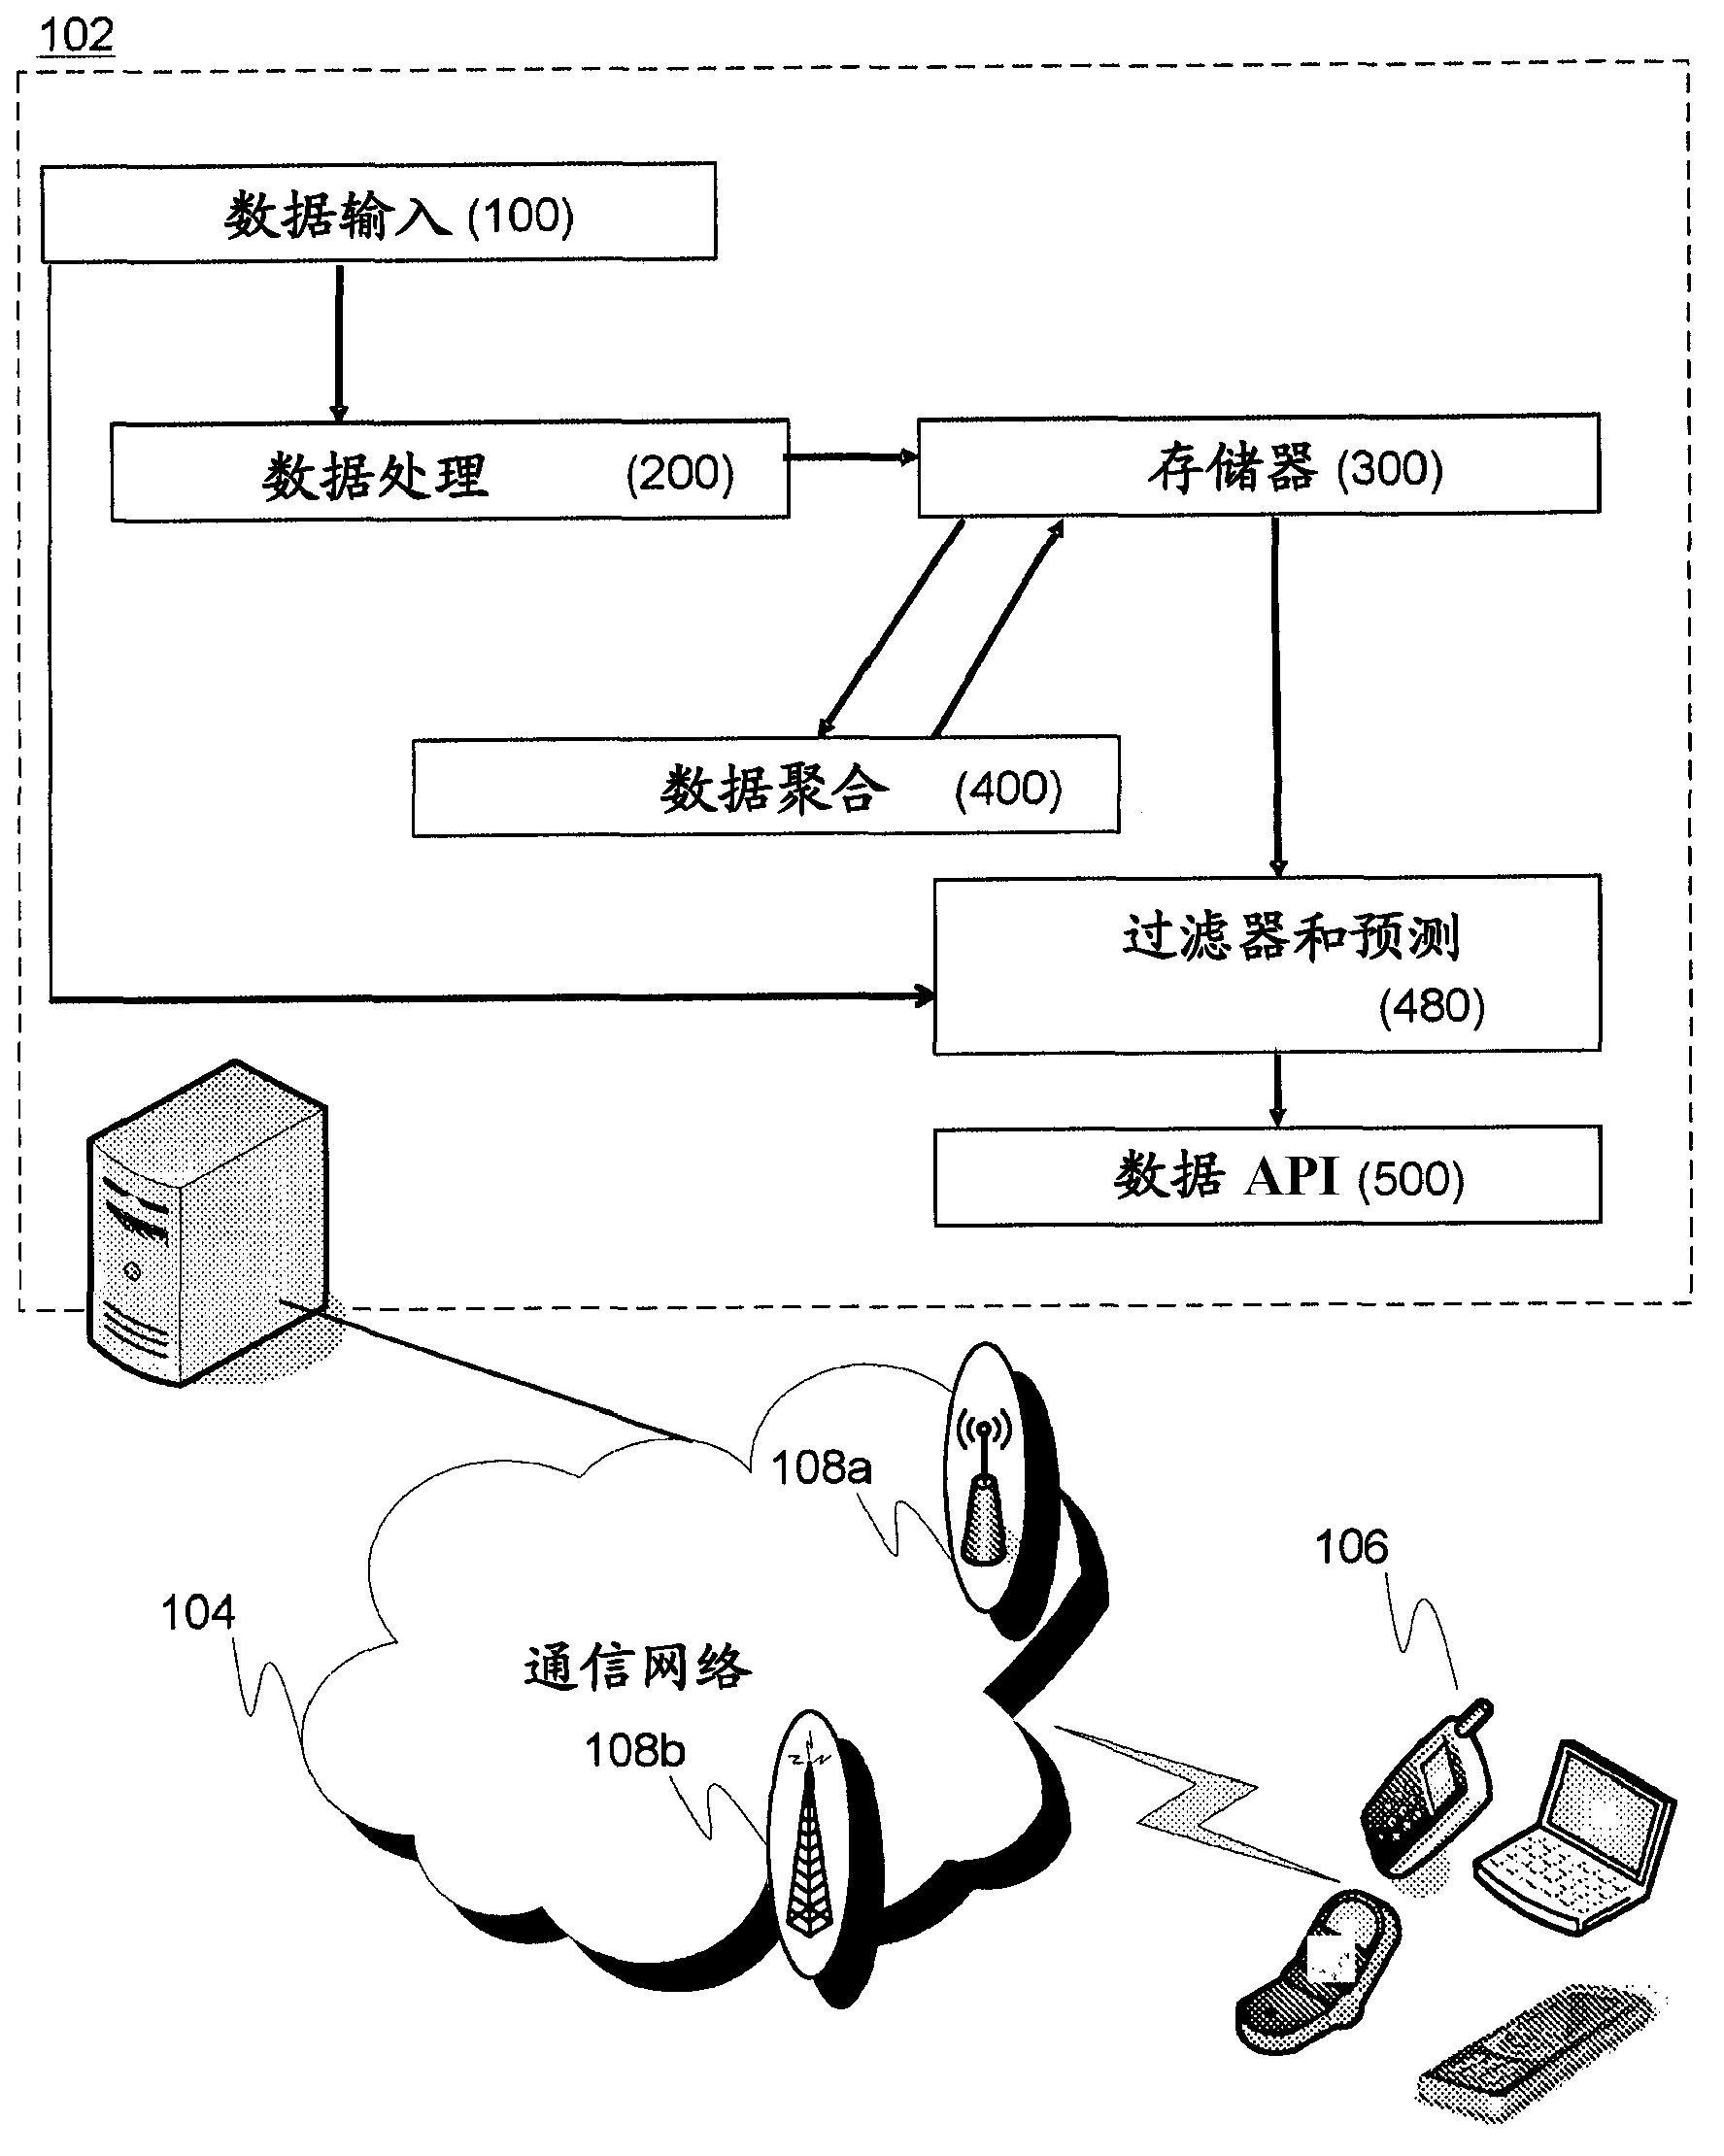 Network server arrangement for processing non-parametric, multi-dimensional, spatial and temporal human behavior or technical observations measured pervasively, and related method for the same